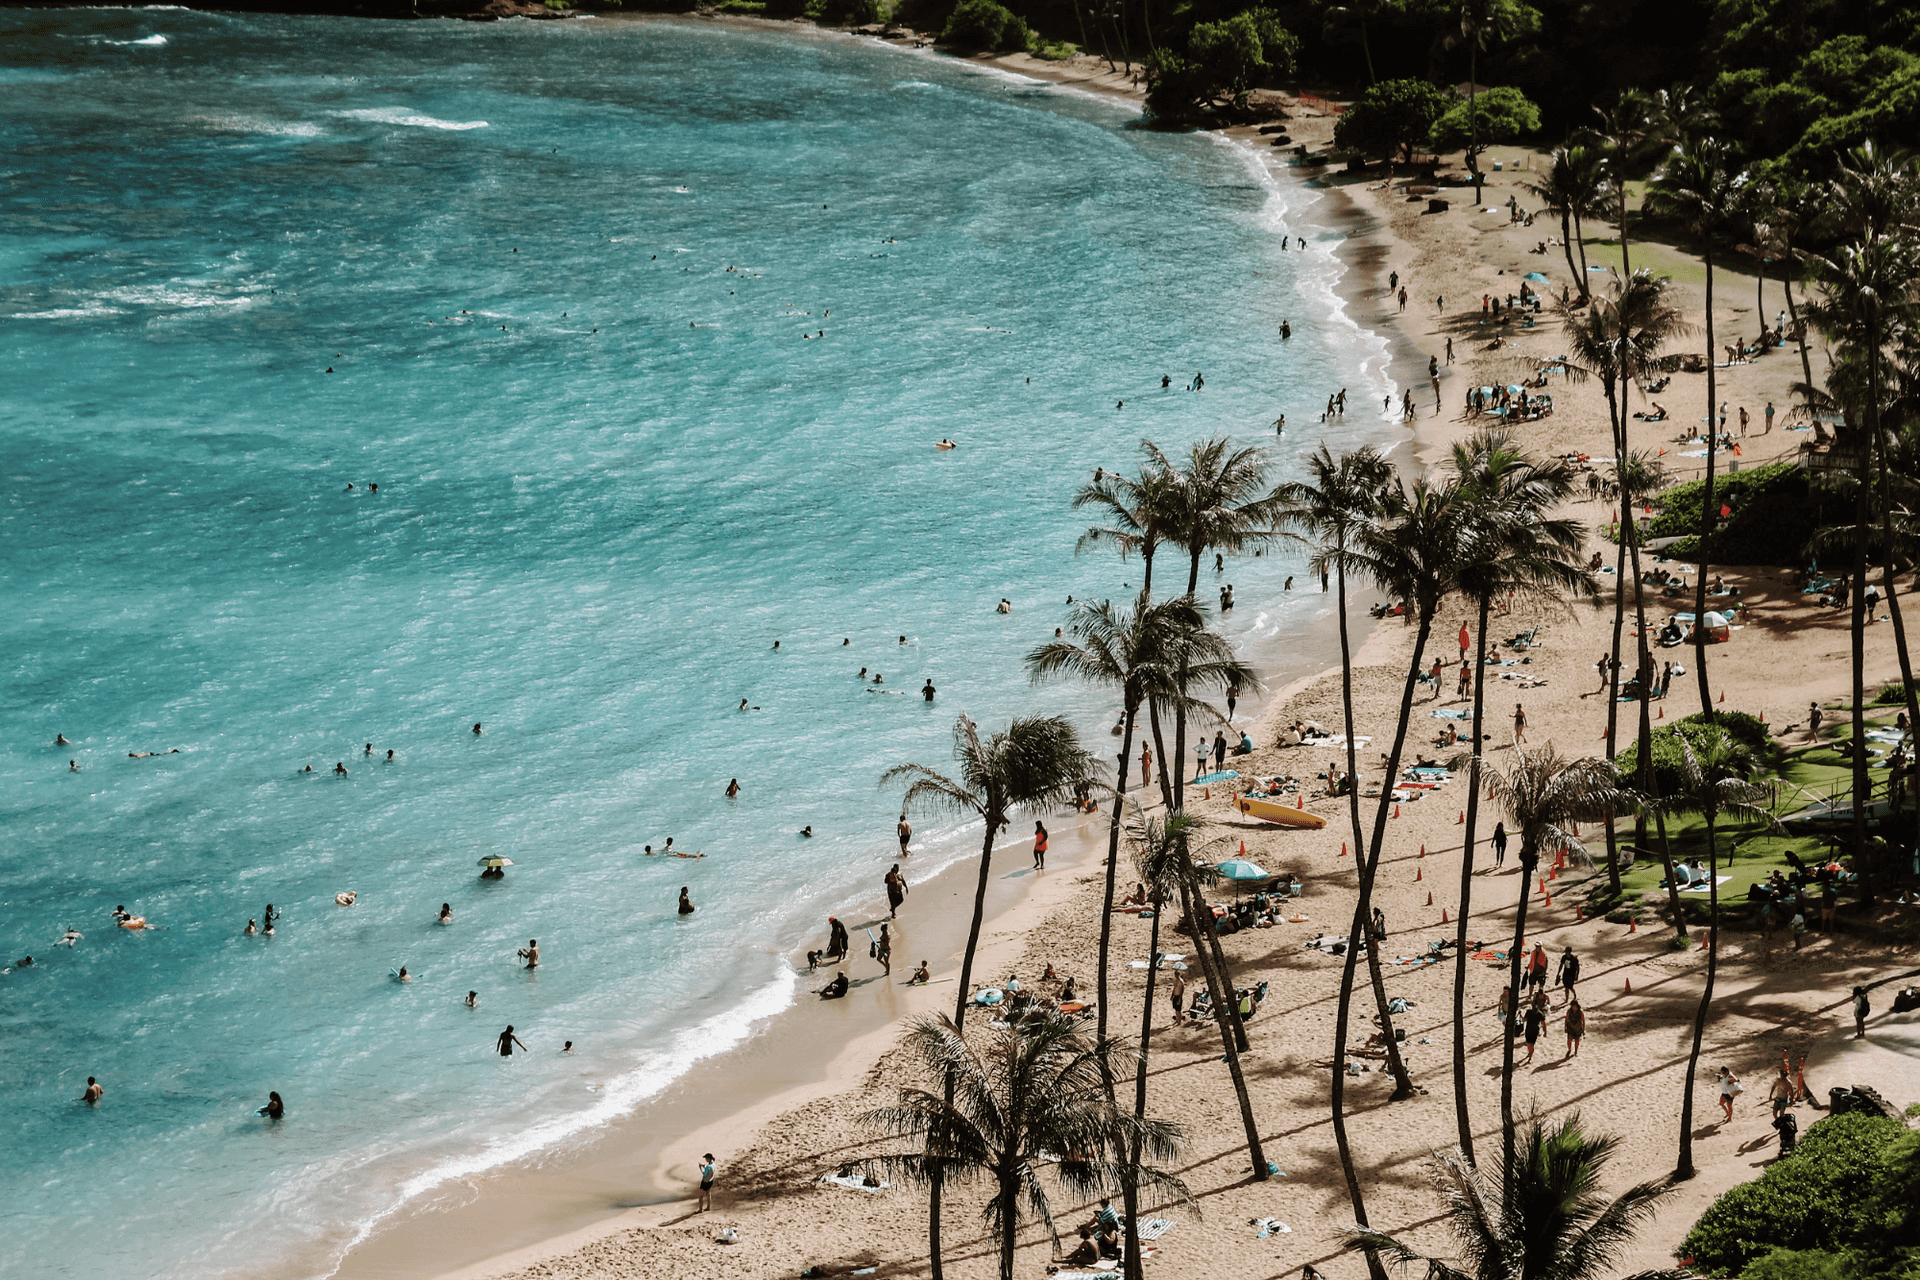 Thanks to Samantha Sophia for this photo from Unsplash, showing a sunny day view of Hanauma Bay.